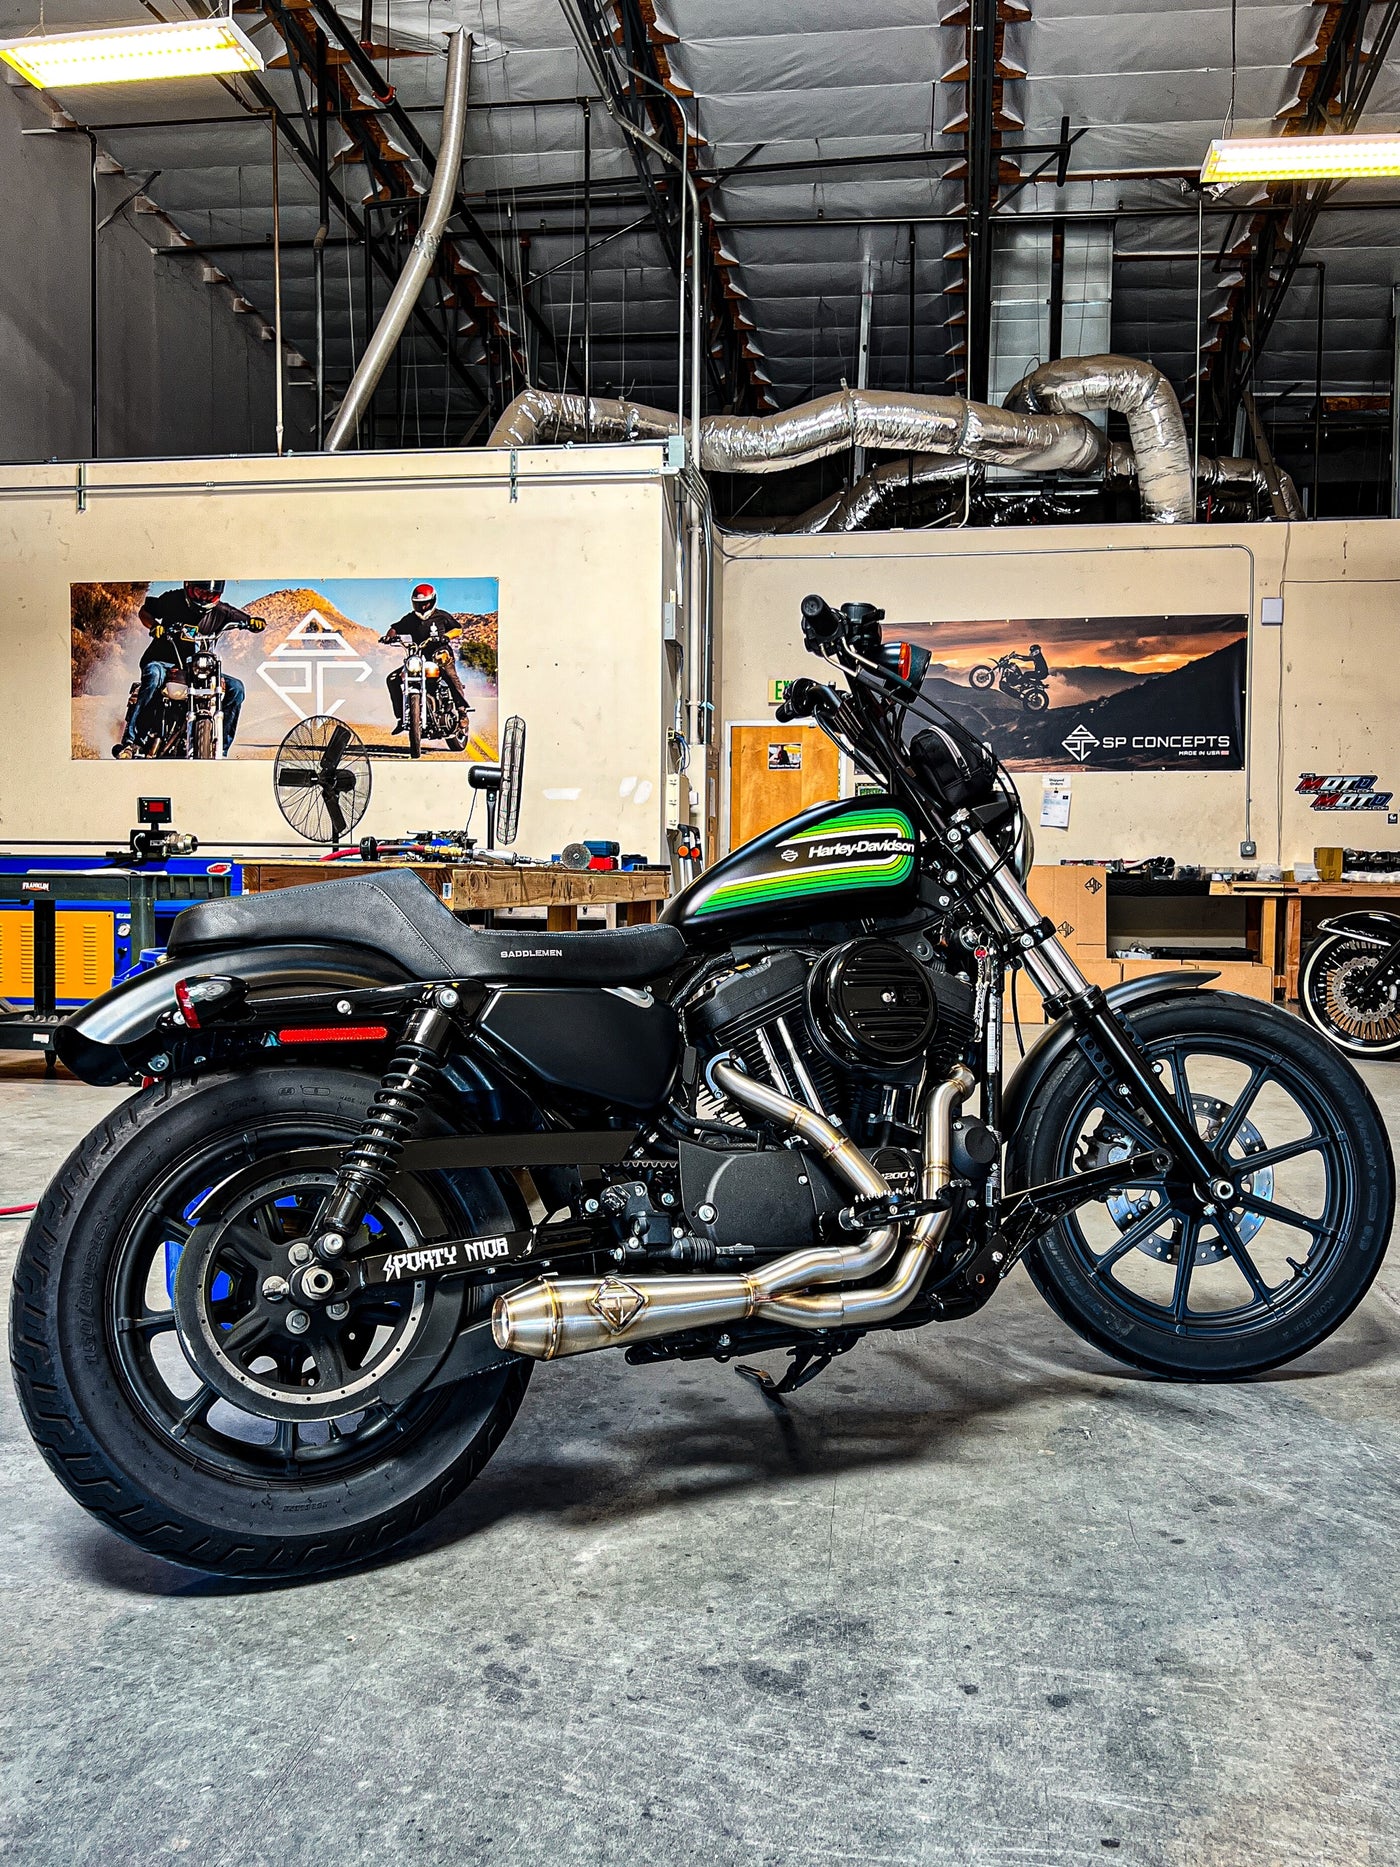 An SP Concepts Lane Splitter Exhaust Sportster 2014-2022 (stainless) motorcycle is parked in a garage.